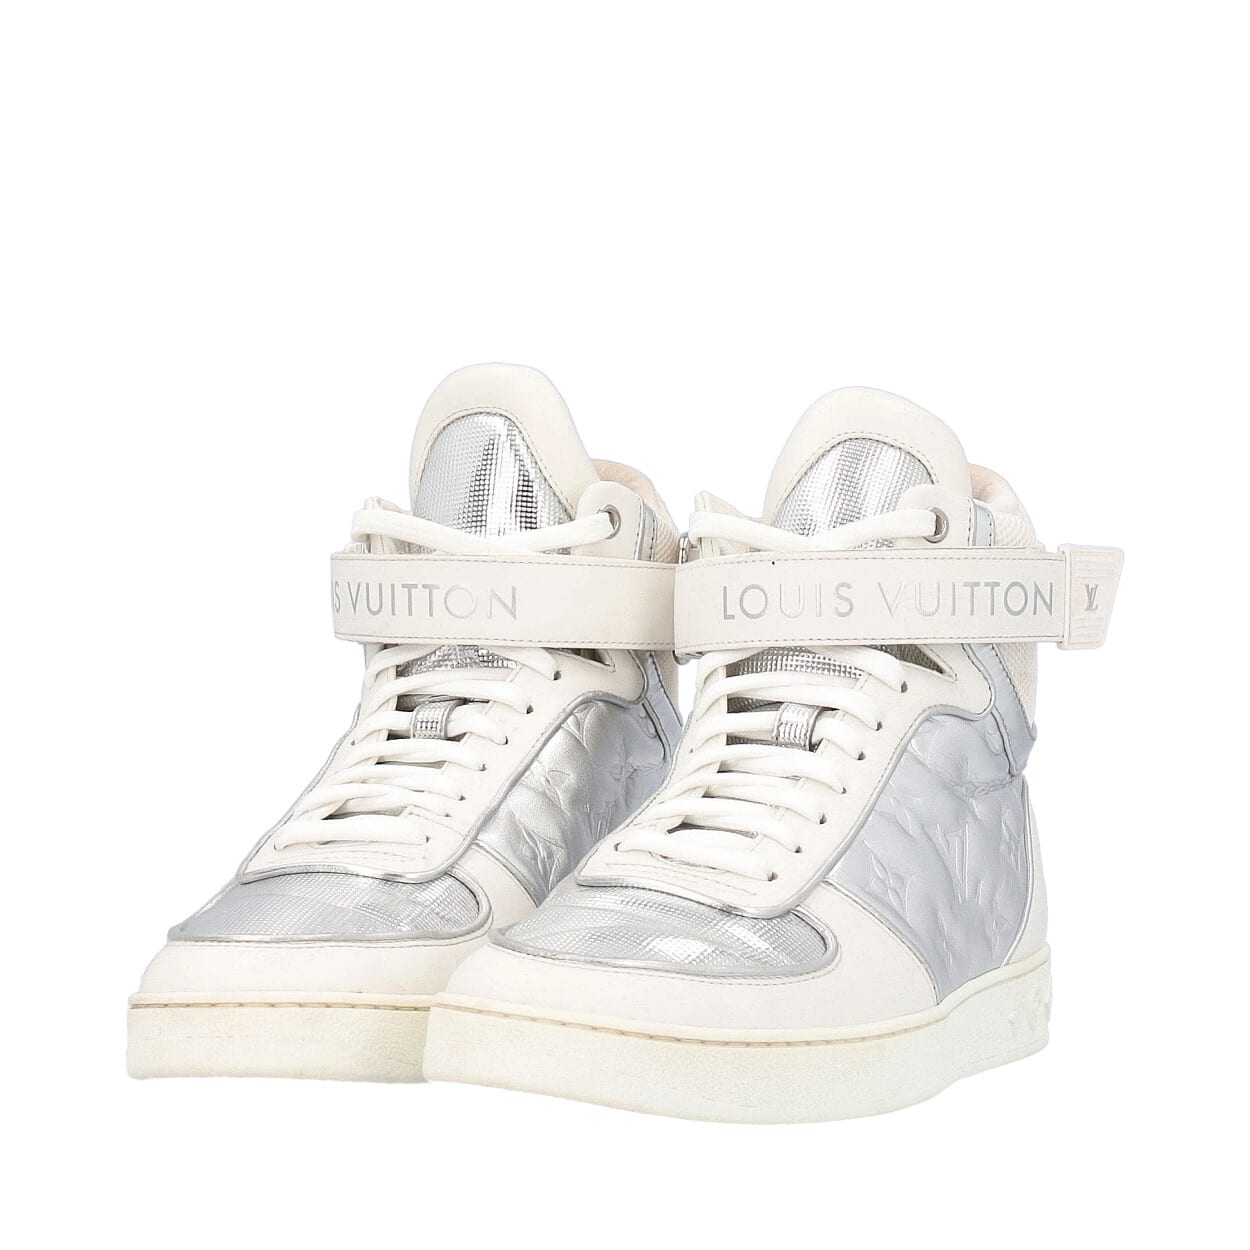 LOUIS VUITTON Leather Boombox Sneakers White/Silver